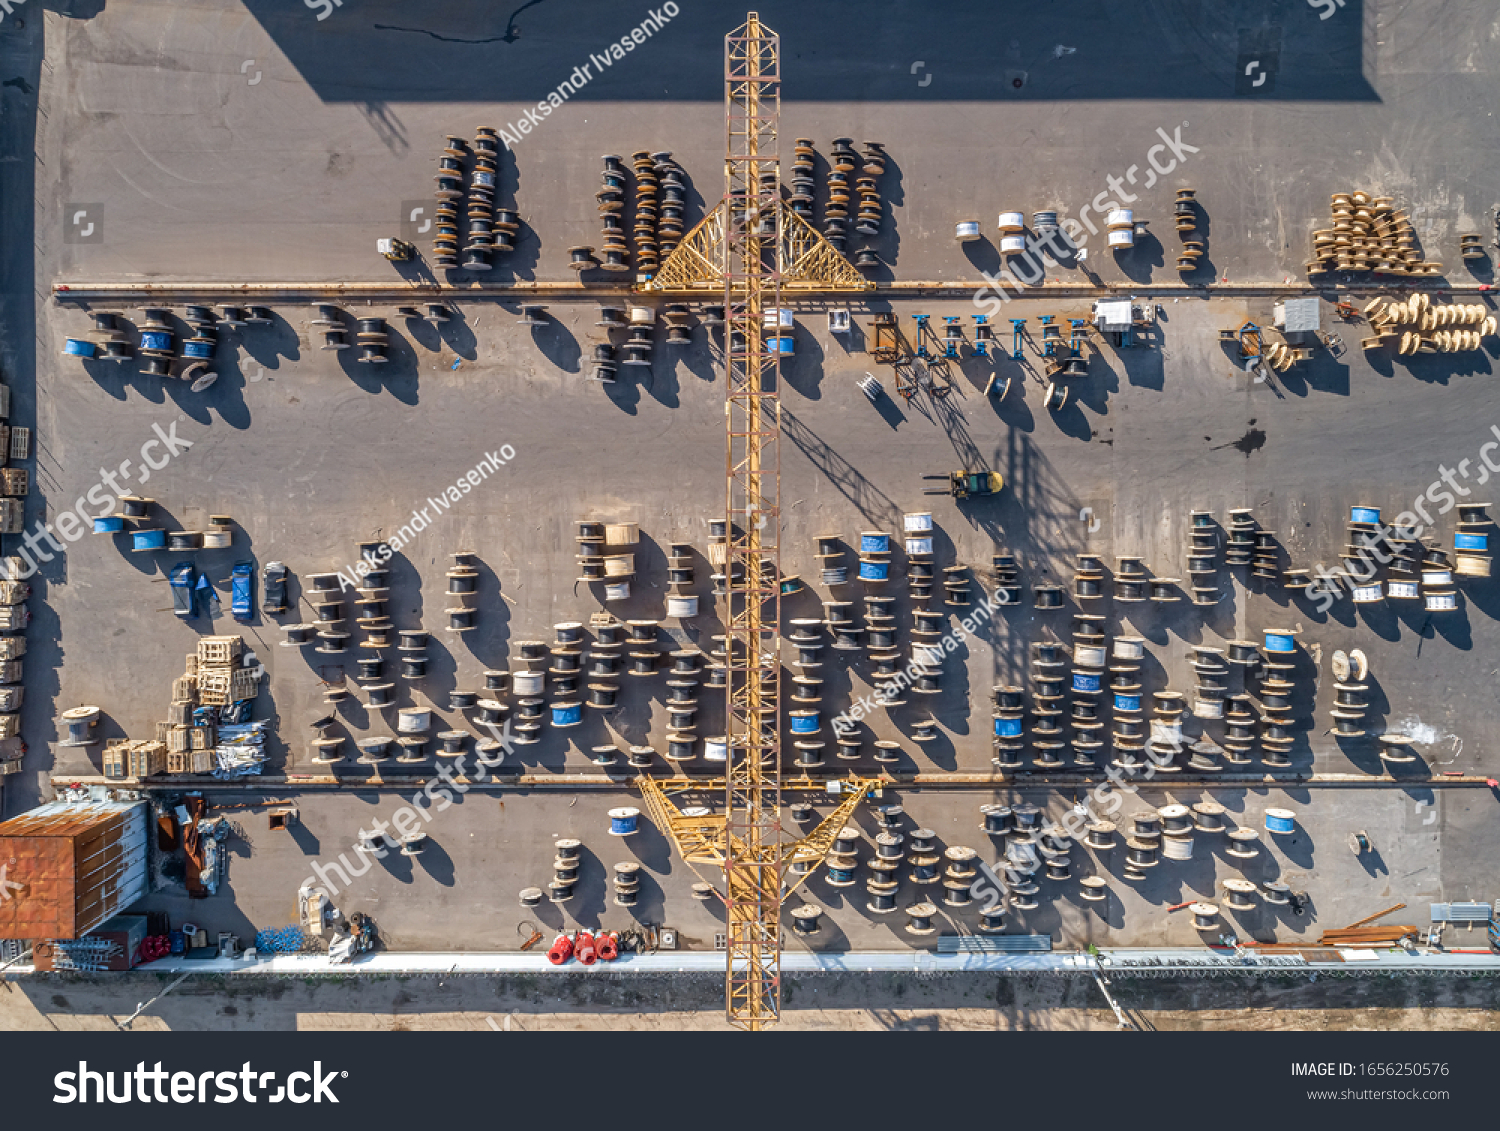 large strelarge street warehouse of electric cable from a bird's eye viewet warehouse of electric cable #1656250576